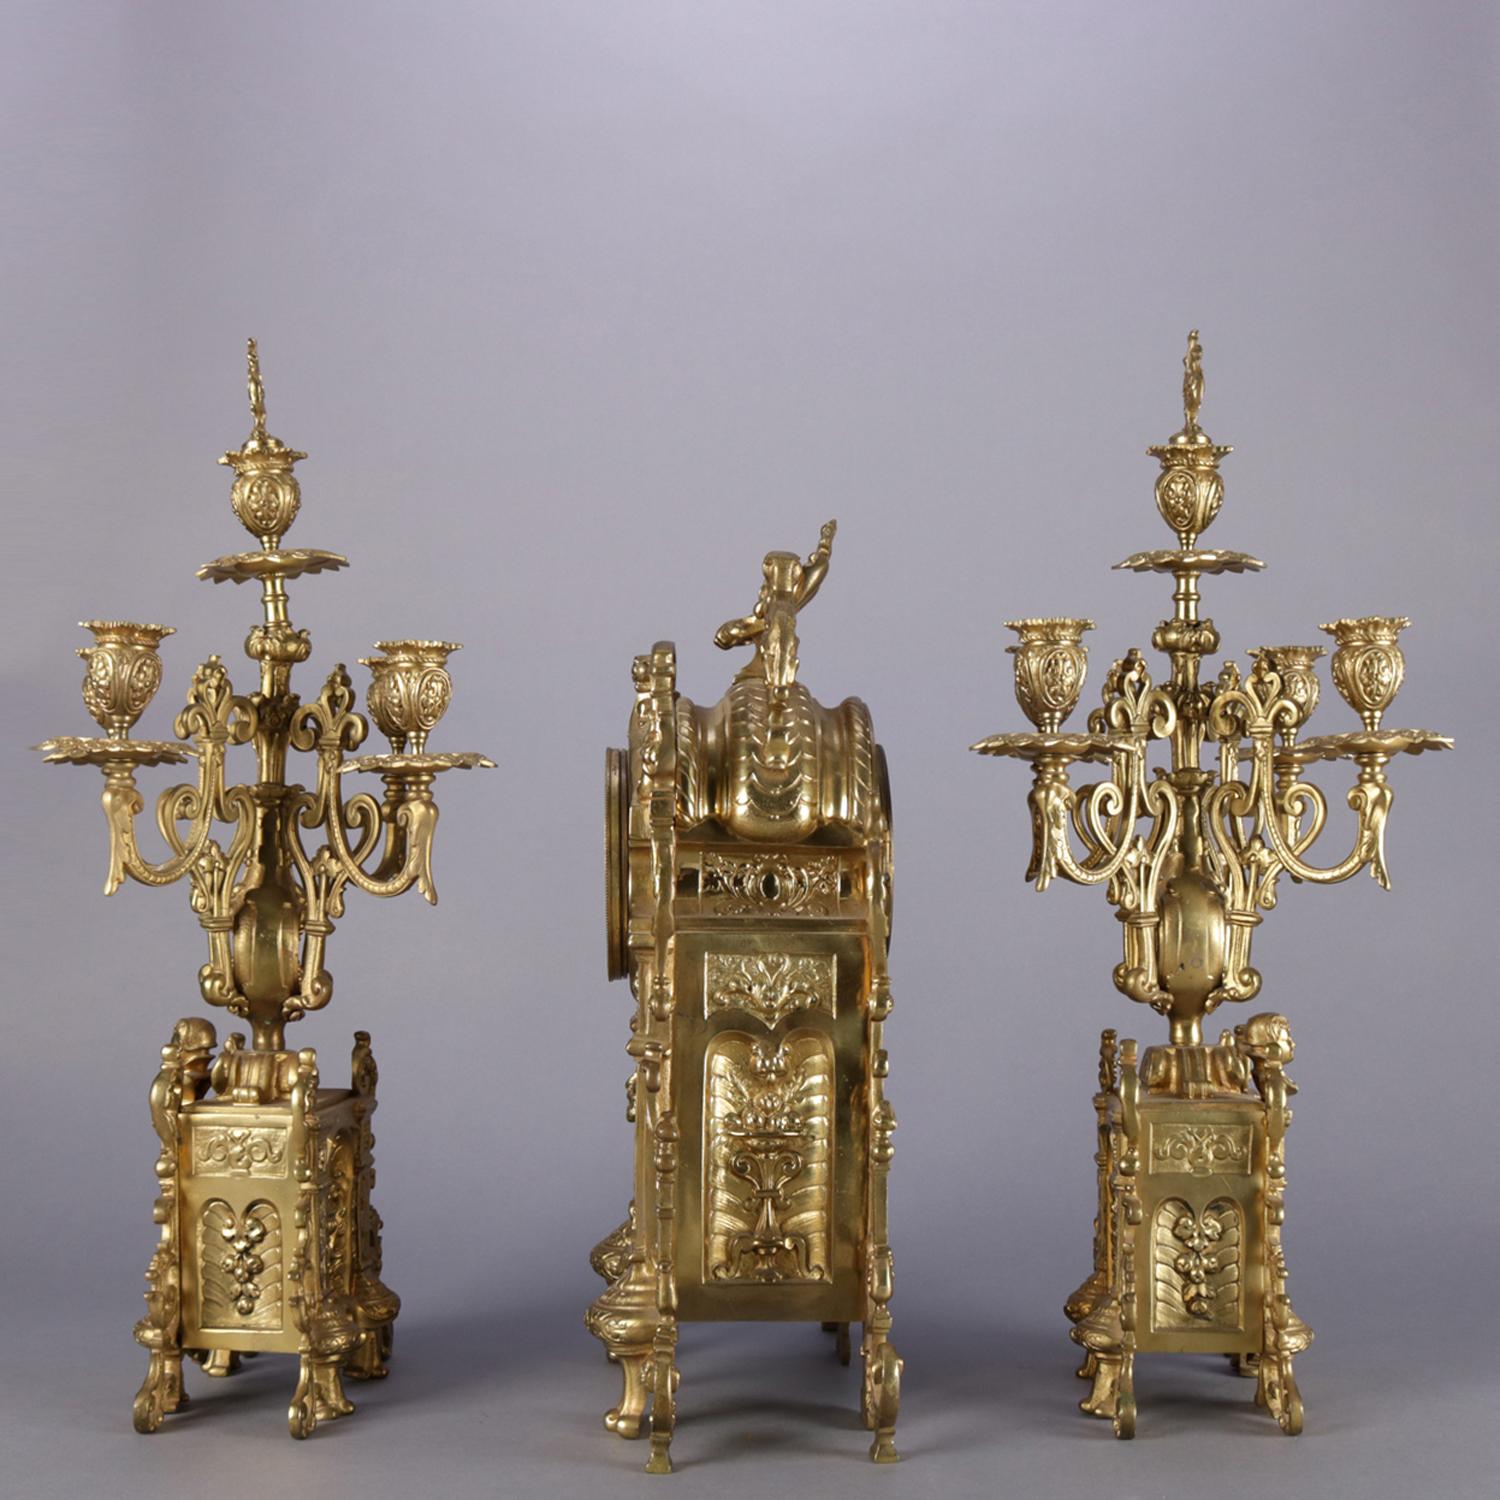 Antique French Louis XV three-piece garniture set features gilt bronze clock with opposing figural lions on crest and case with foliate and scroll decoration and central mask of the king, flaked by matching four arm candelabra with urn and flame